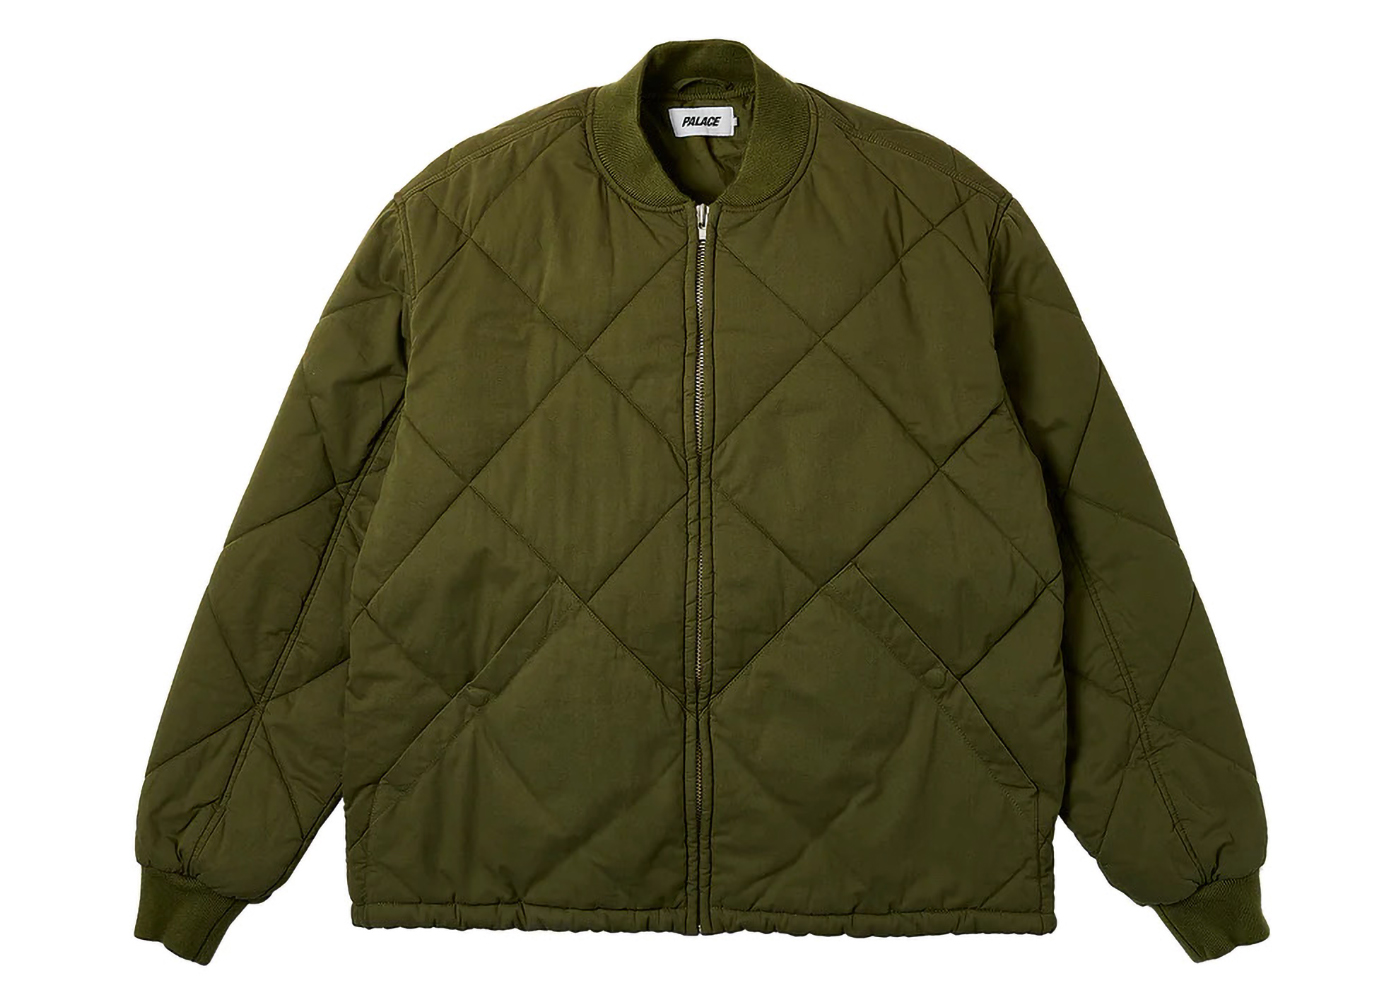 PALACE Quilted Jacket The Deep Green - ジャケット・アウター